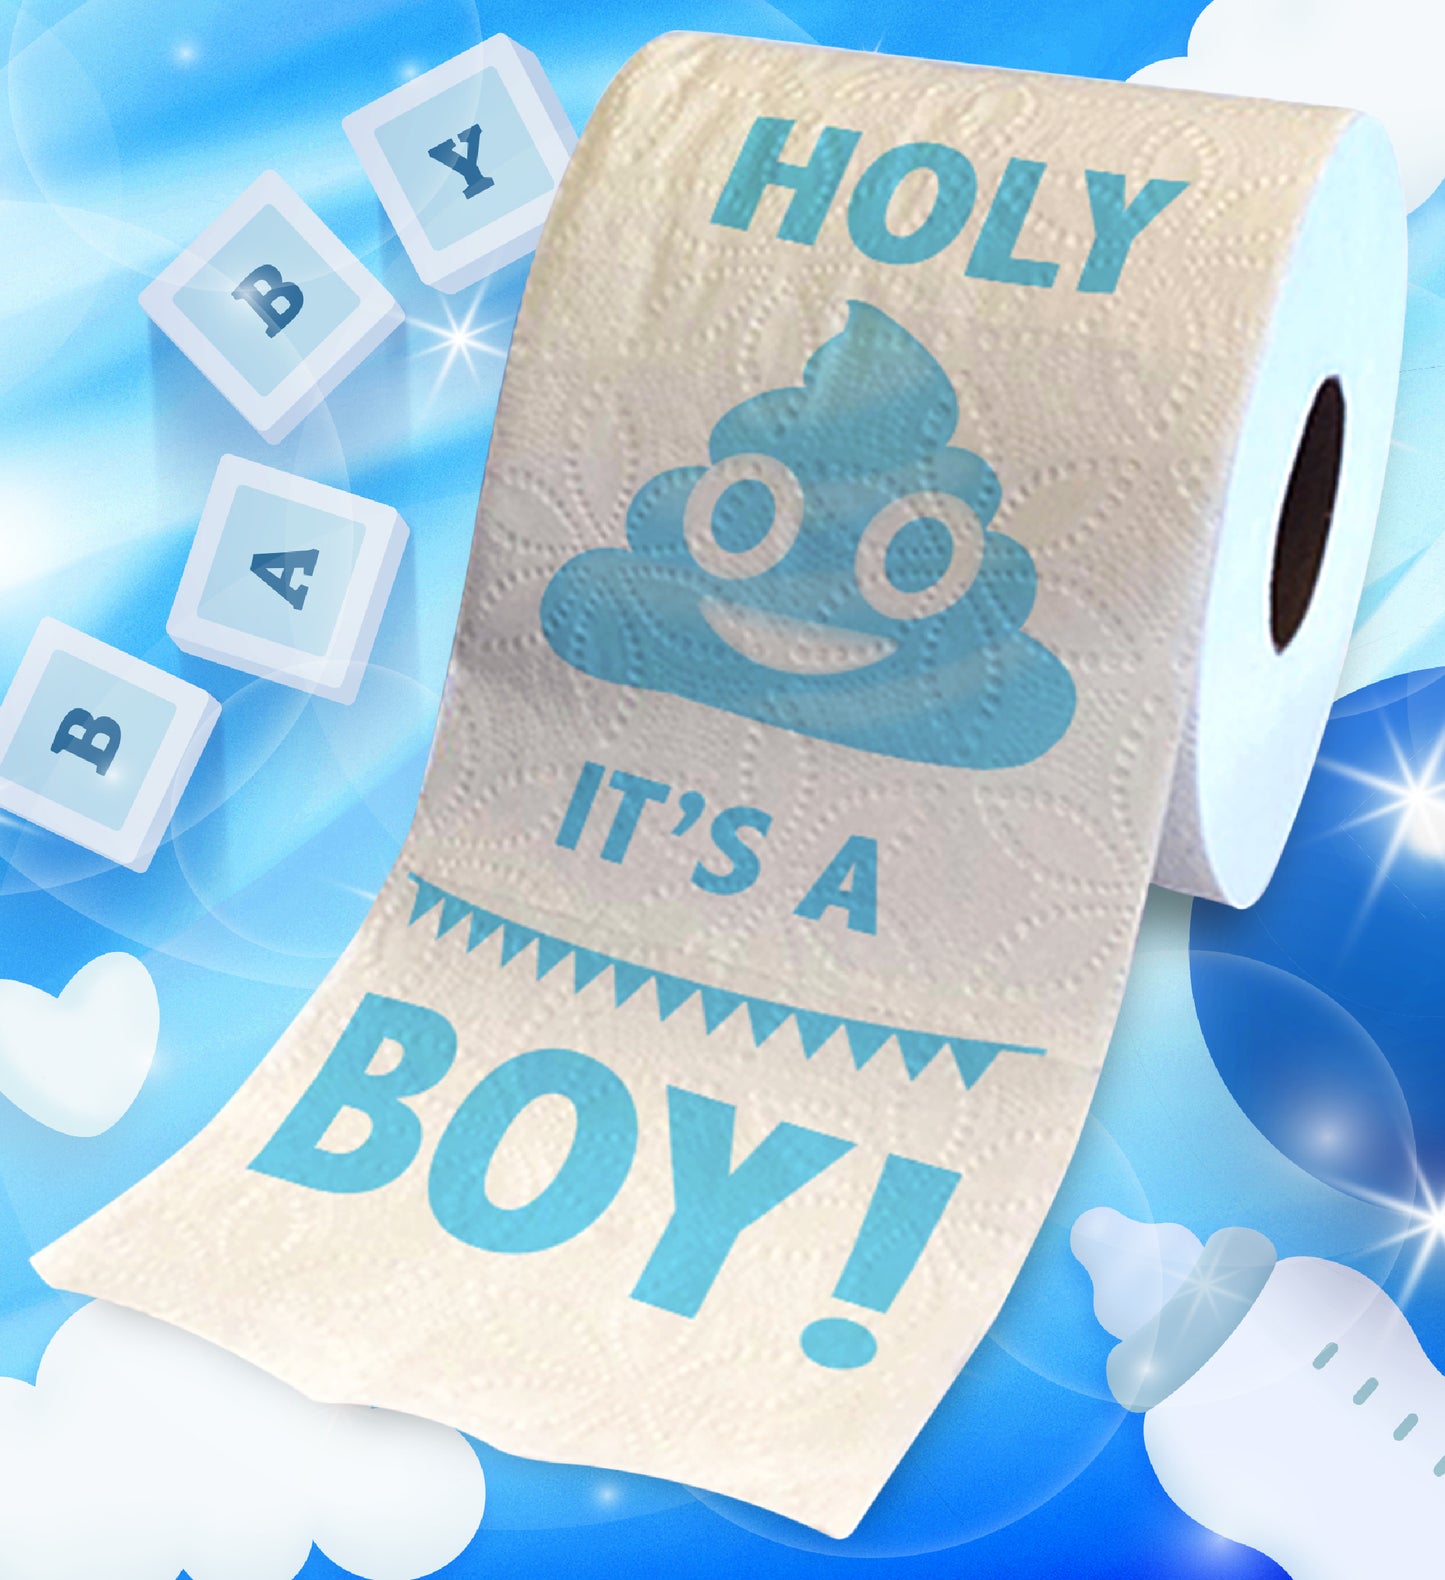 Printed TP Holy Poop It's a Boy! Toilet Paper Roll for Baby Shower Gender Reveal